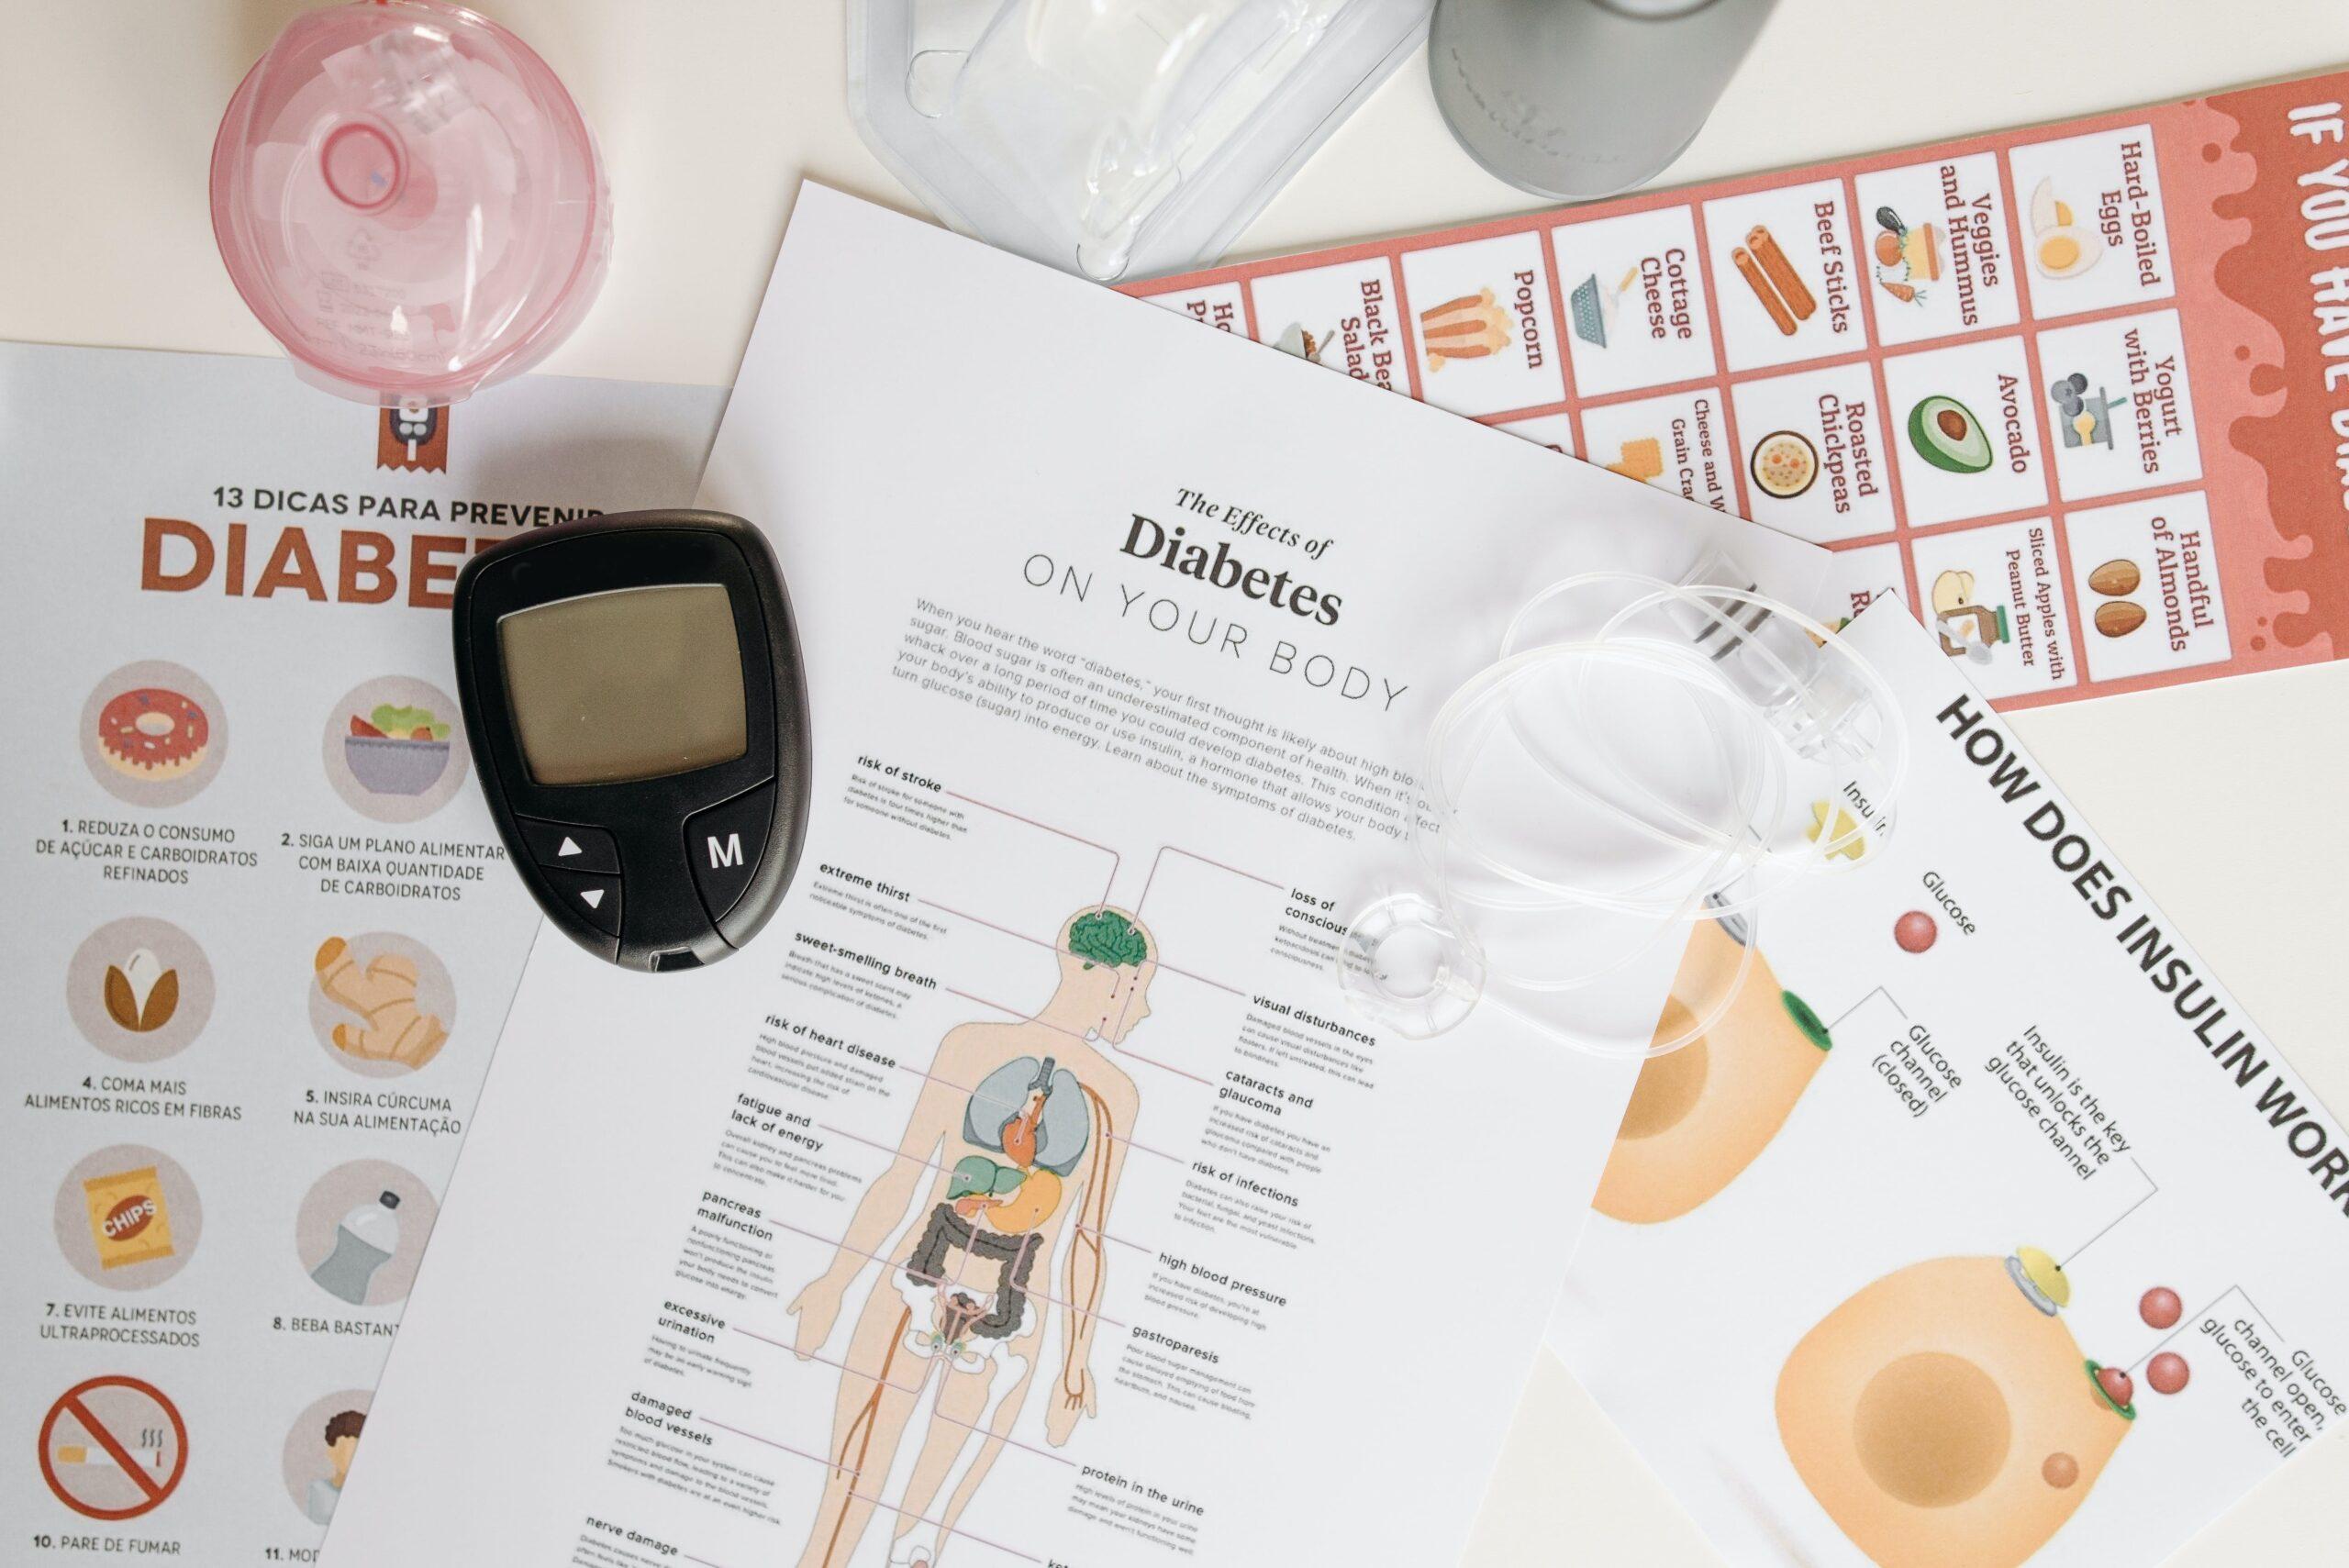 Glucose monitor and handouts discussing diabetes nutrition